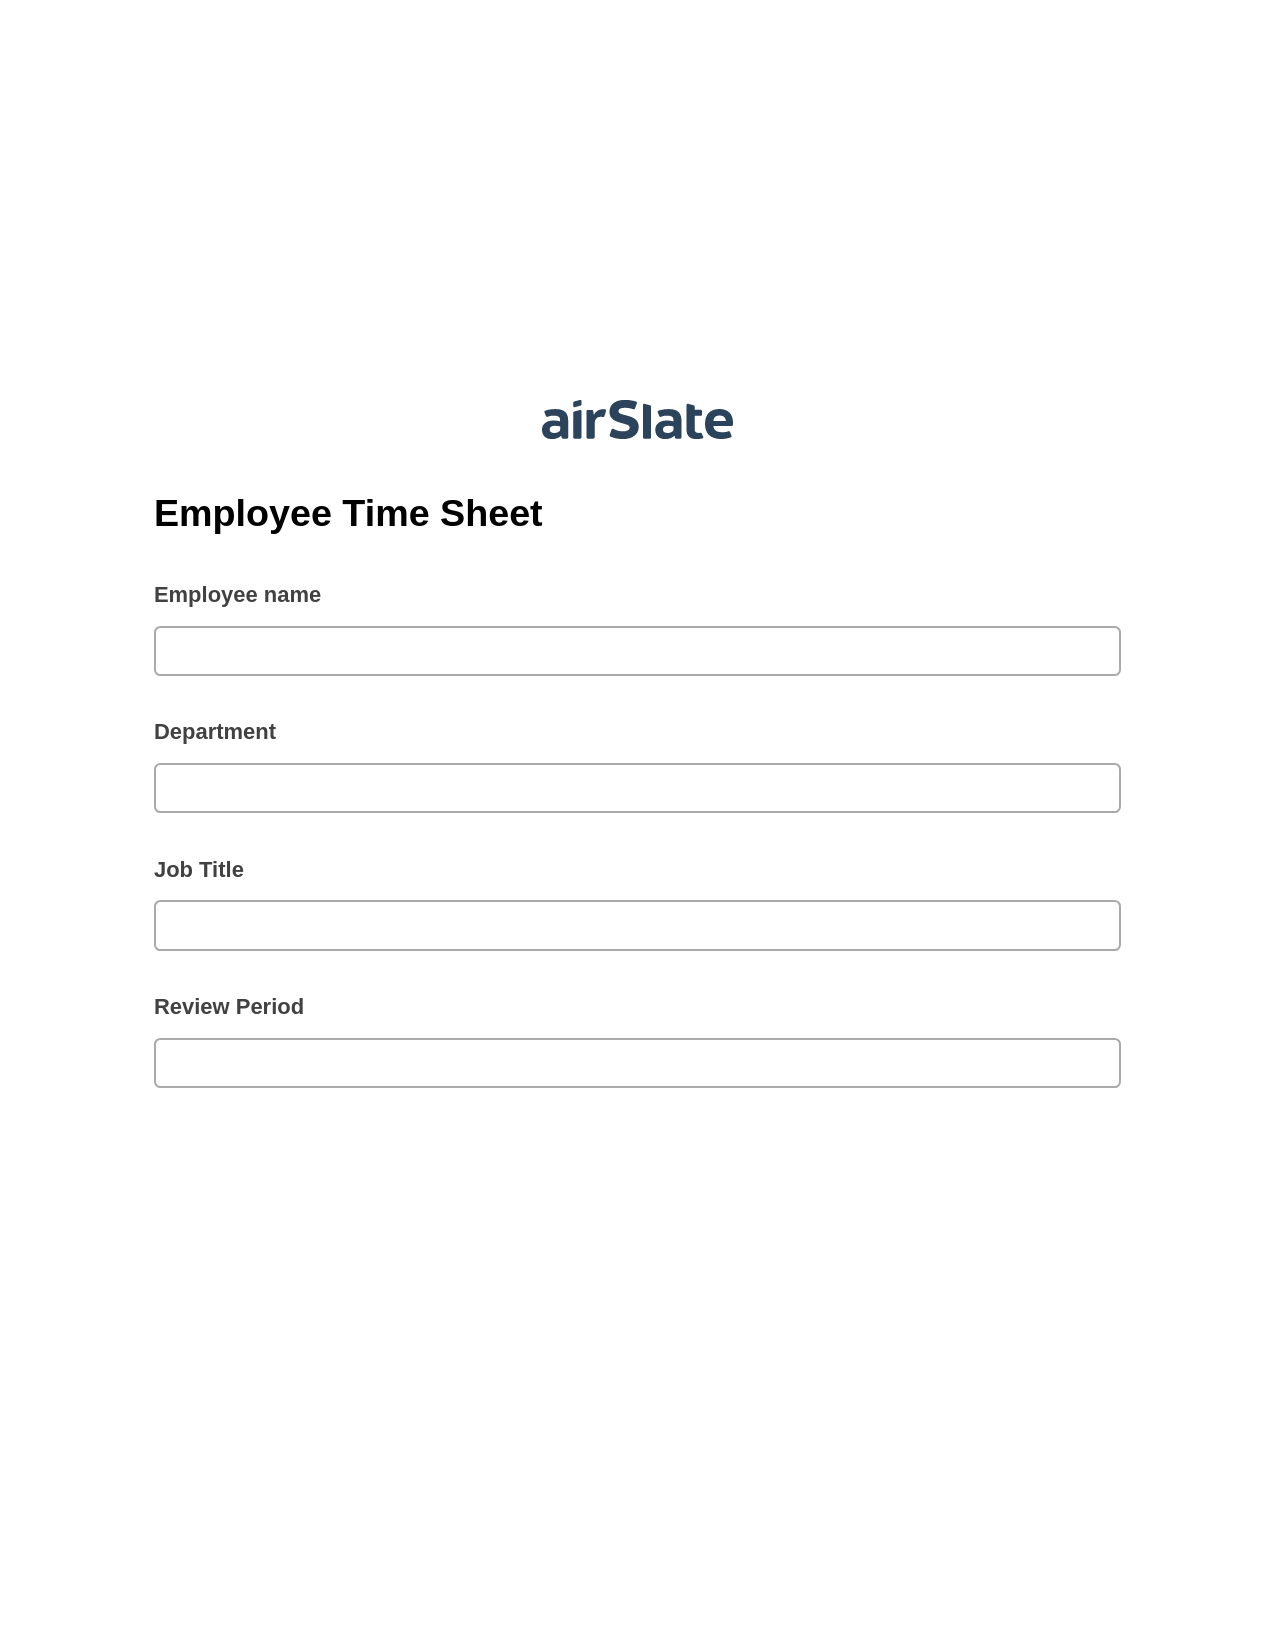 Multirole Employee Time Sheet Pre-fill from Salesforce Records with SOQL Bot, Create Salesforce Records Bot, Post-finish Document Bot